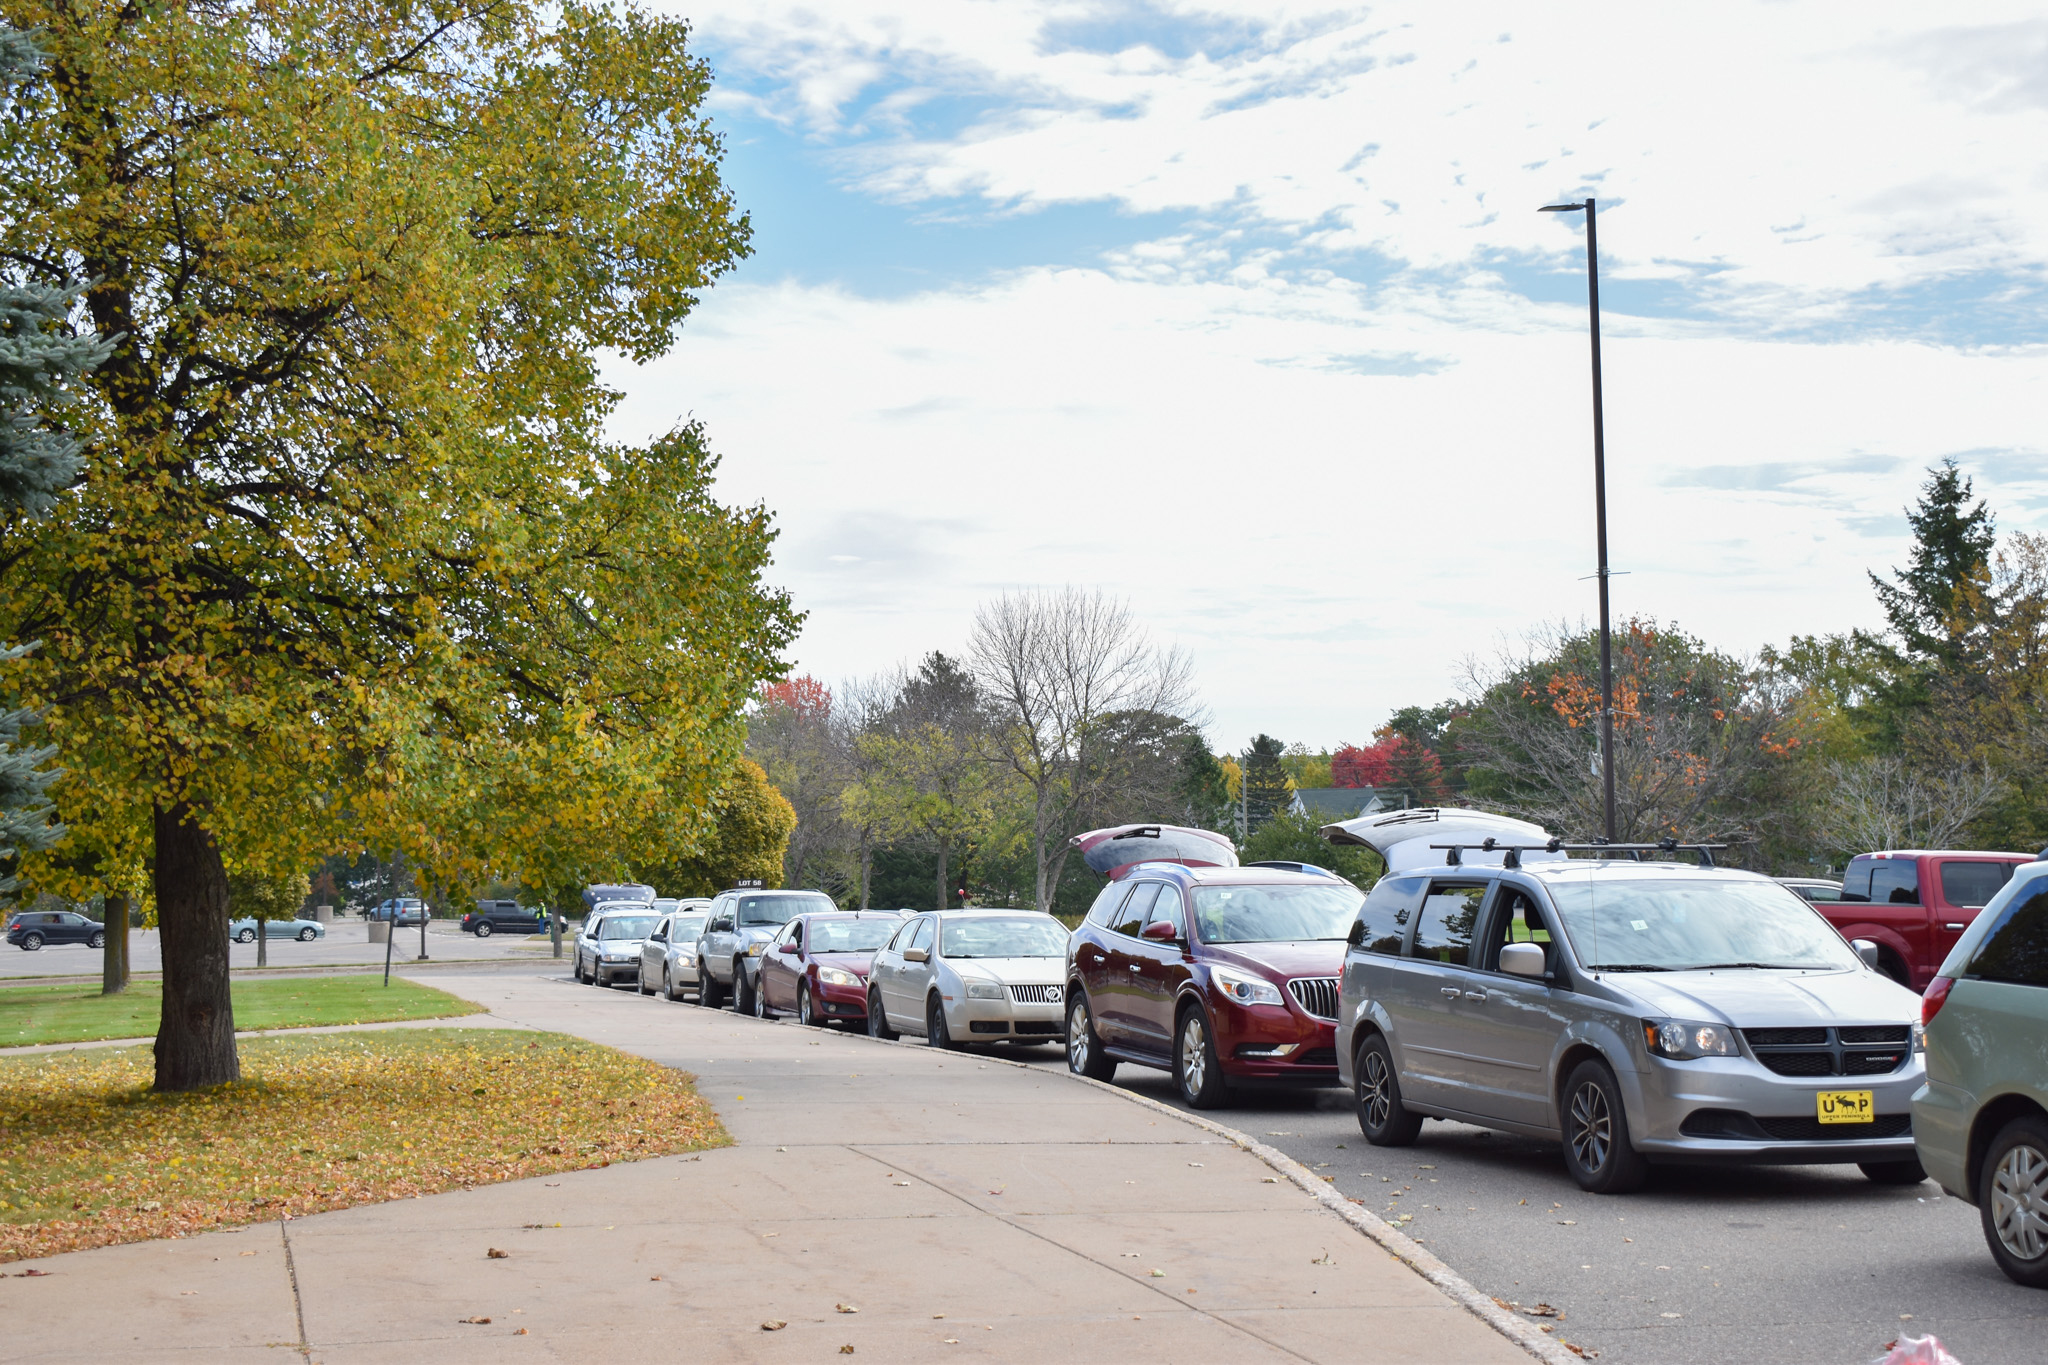 Cars lined up at a Mobile Pantry